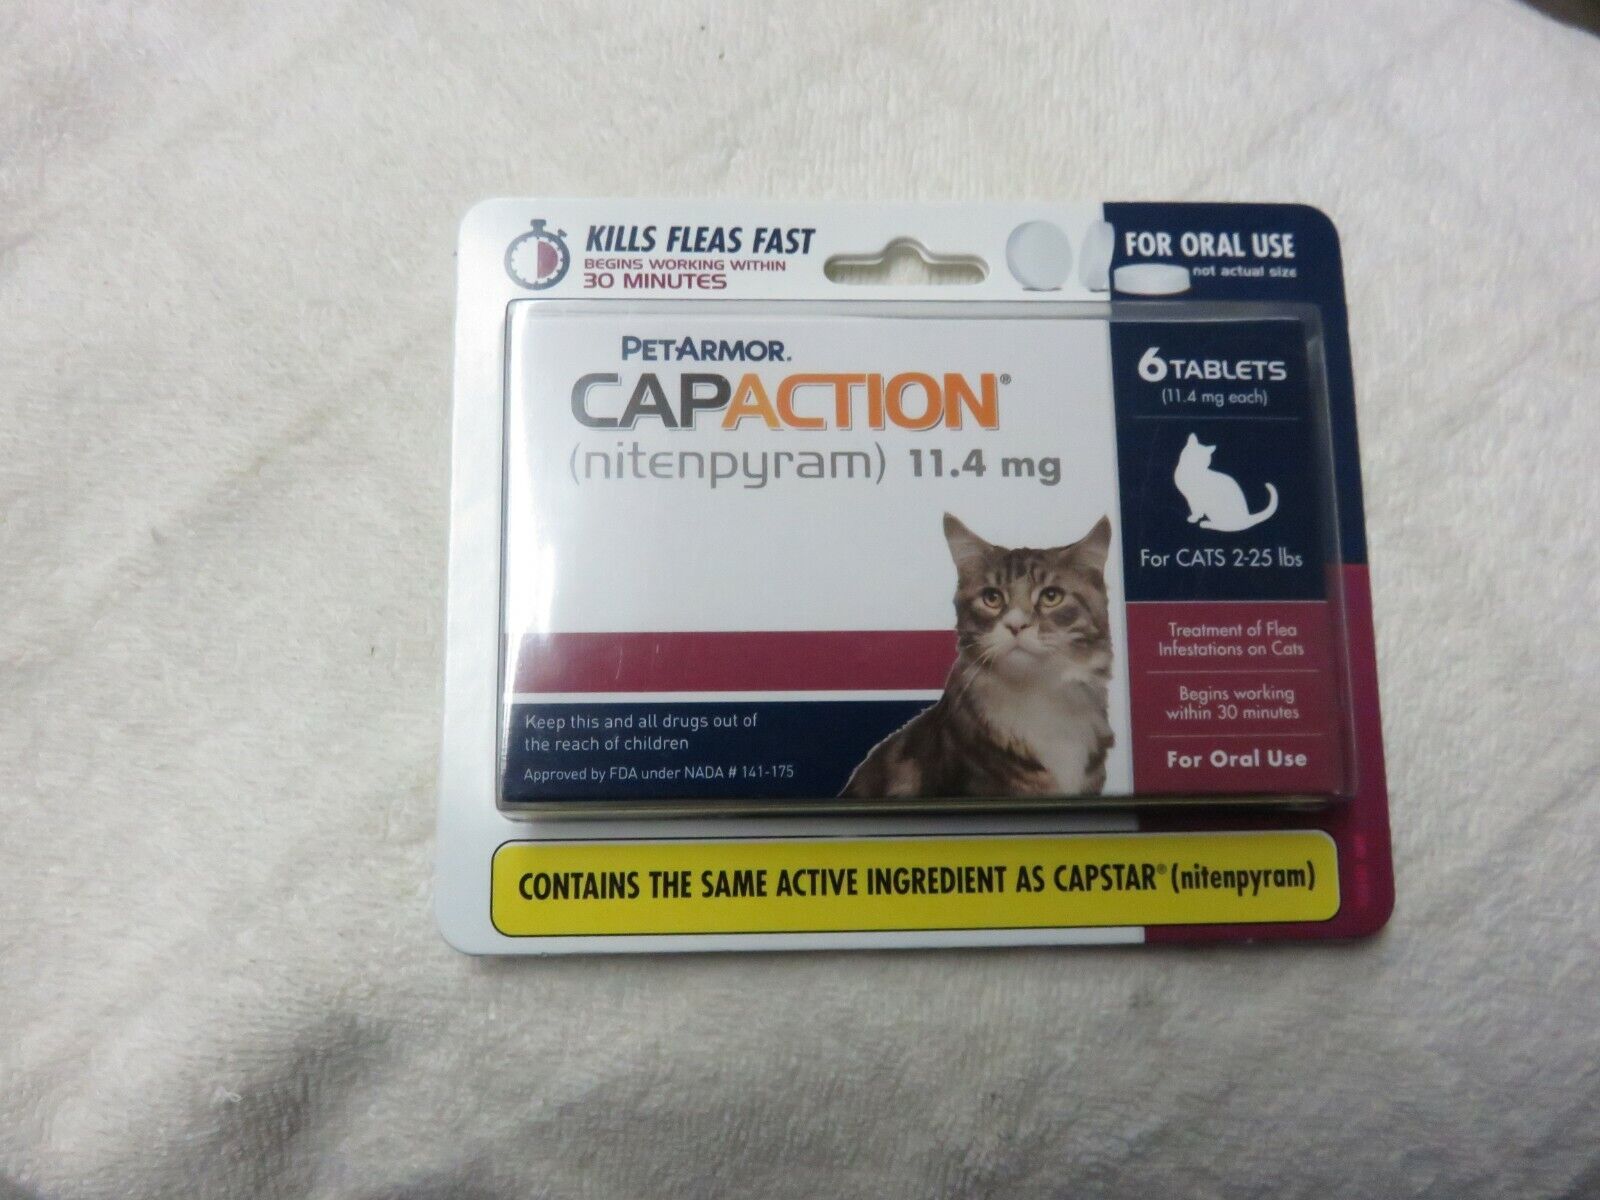 PETARMOR CAPACTION FOR CATS 2-25 LBS. 6 TABLETS KILLS FLEAS FAST FREE SHIPPING